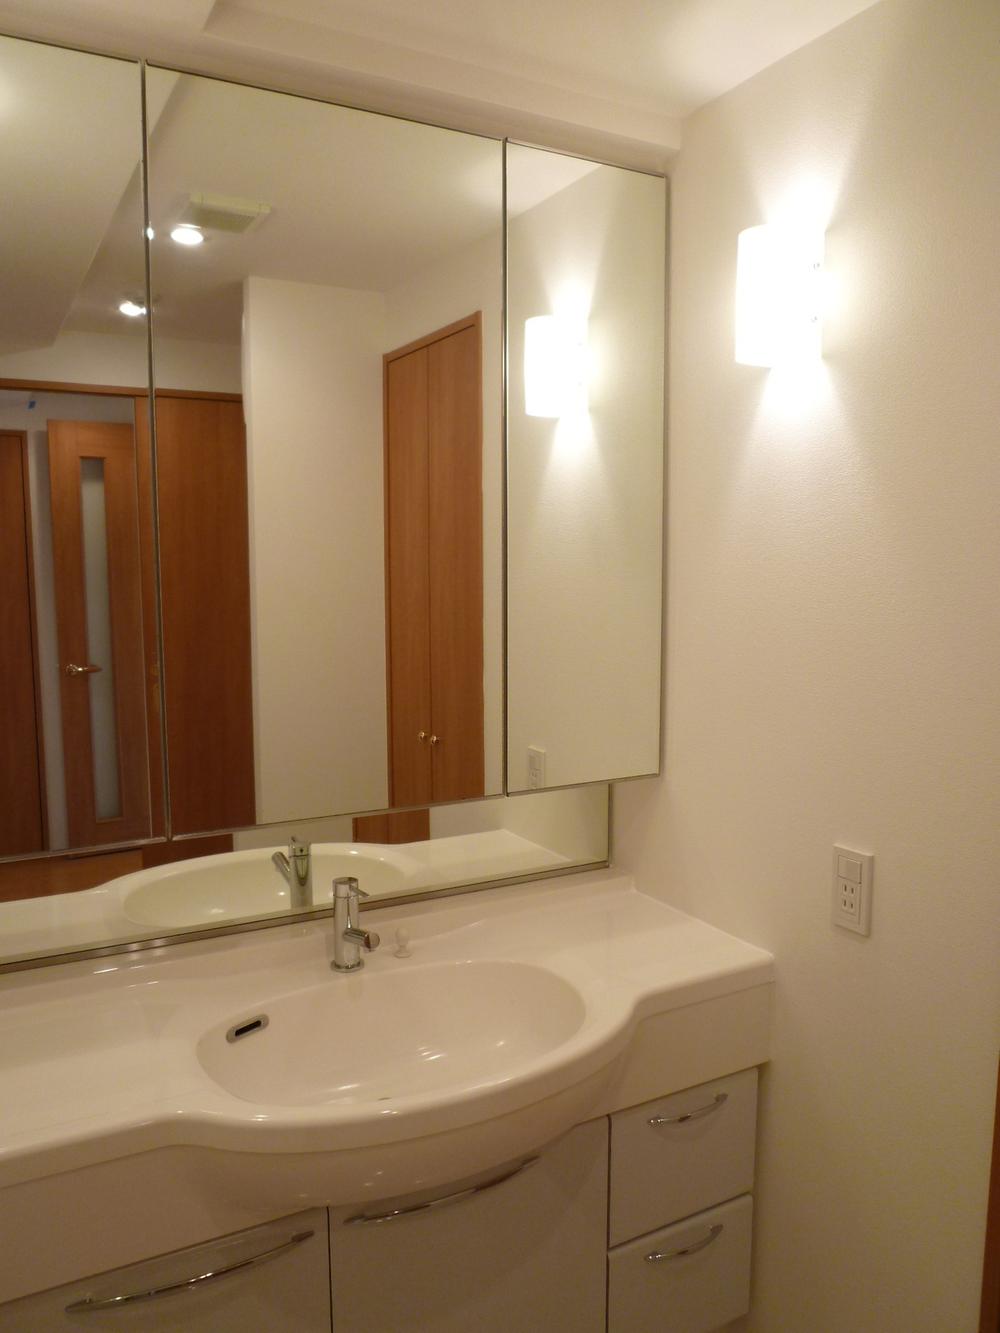 Wash basin, toilet. There is three-sided mirror back storage